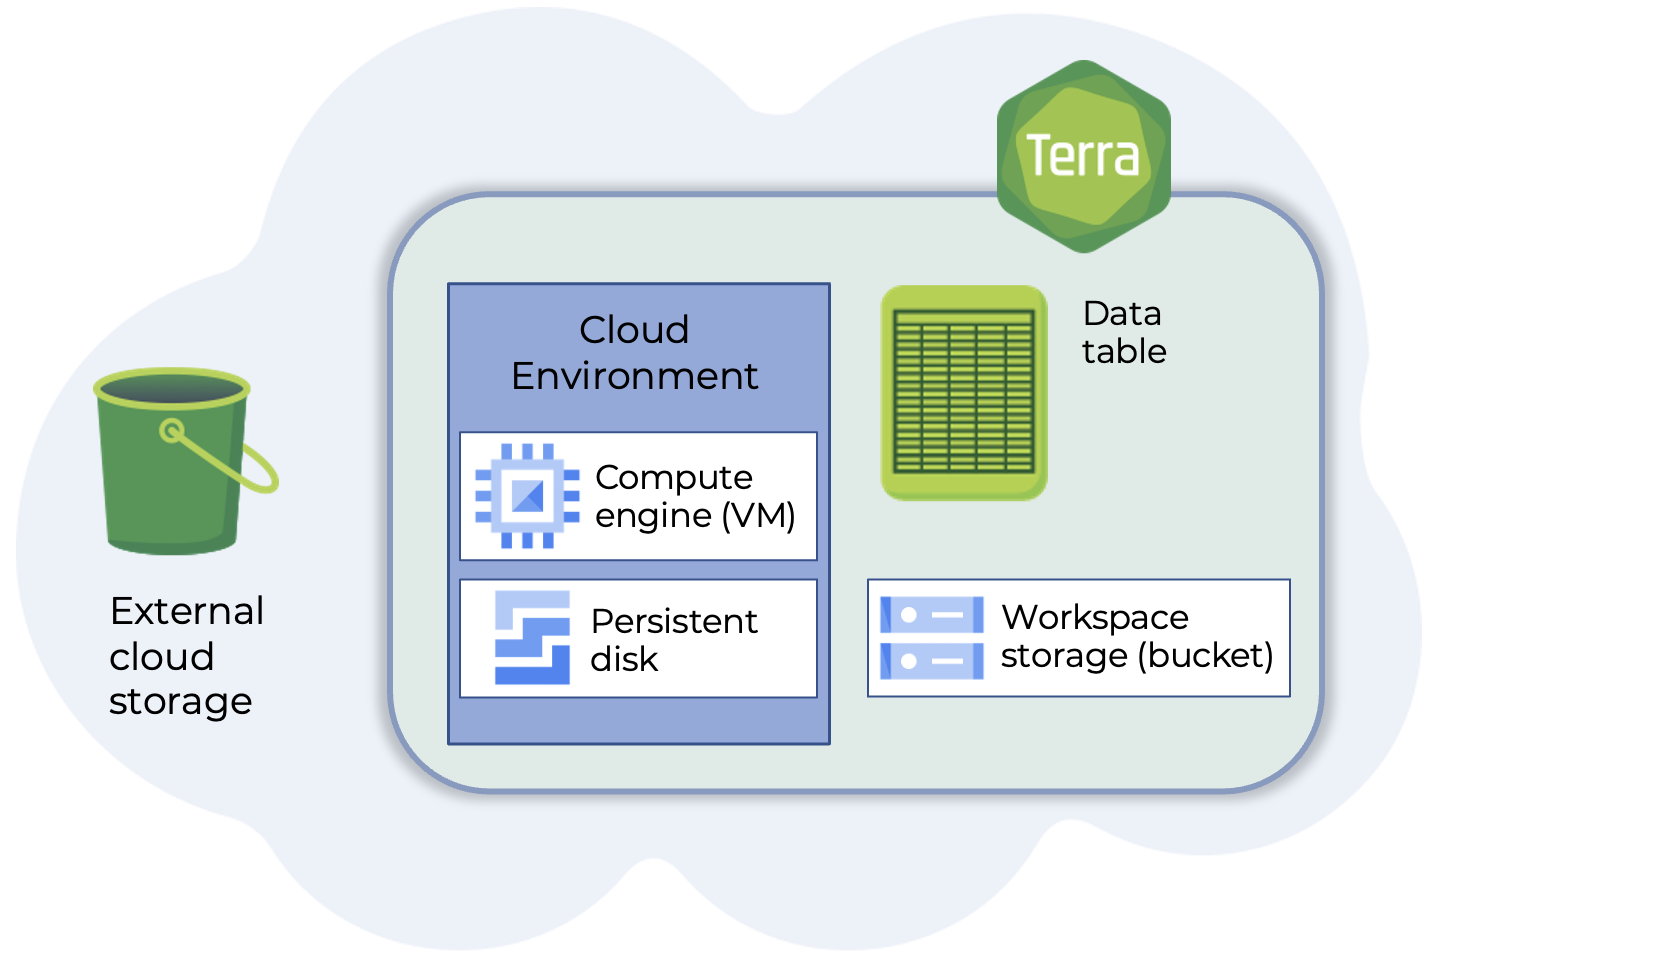 Diagram of a Terra workspace plus external bucket, all existing in the cloud. The workspace is comprised of-a cloud environment with compute engine and persistent disk storage,  workspace storage bucket and data tables.